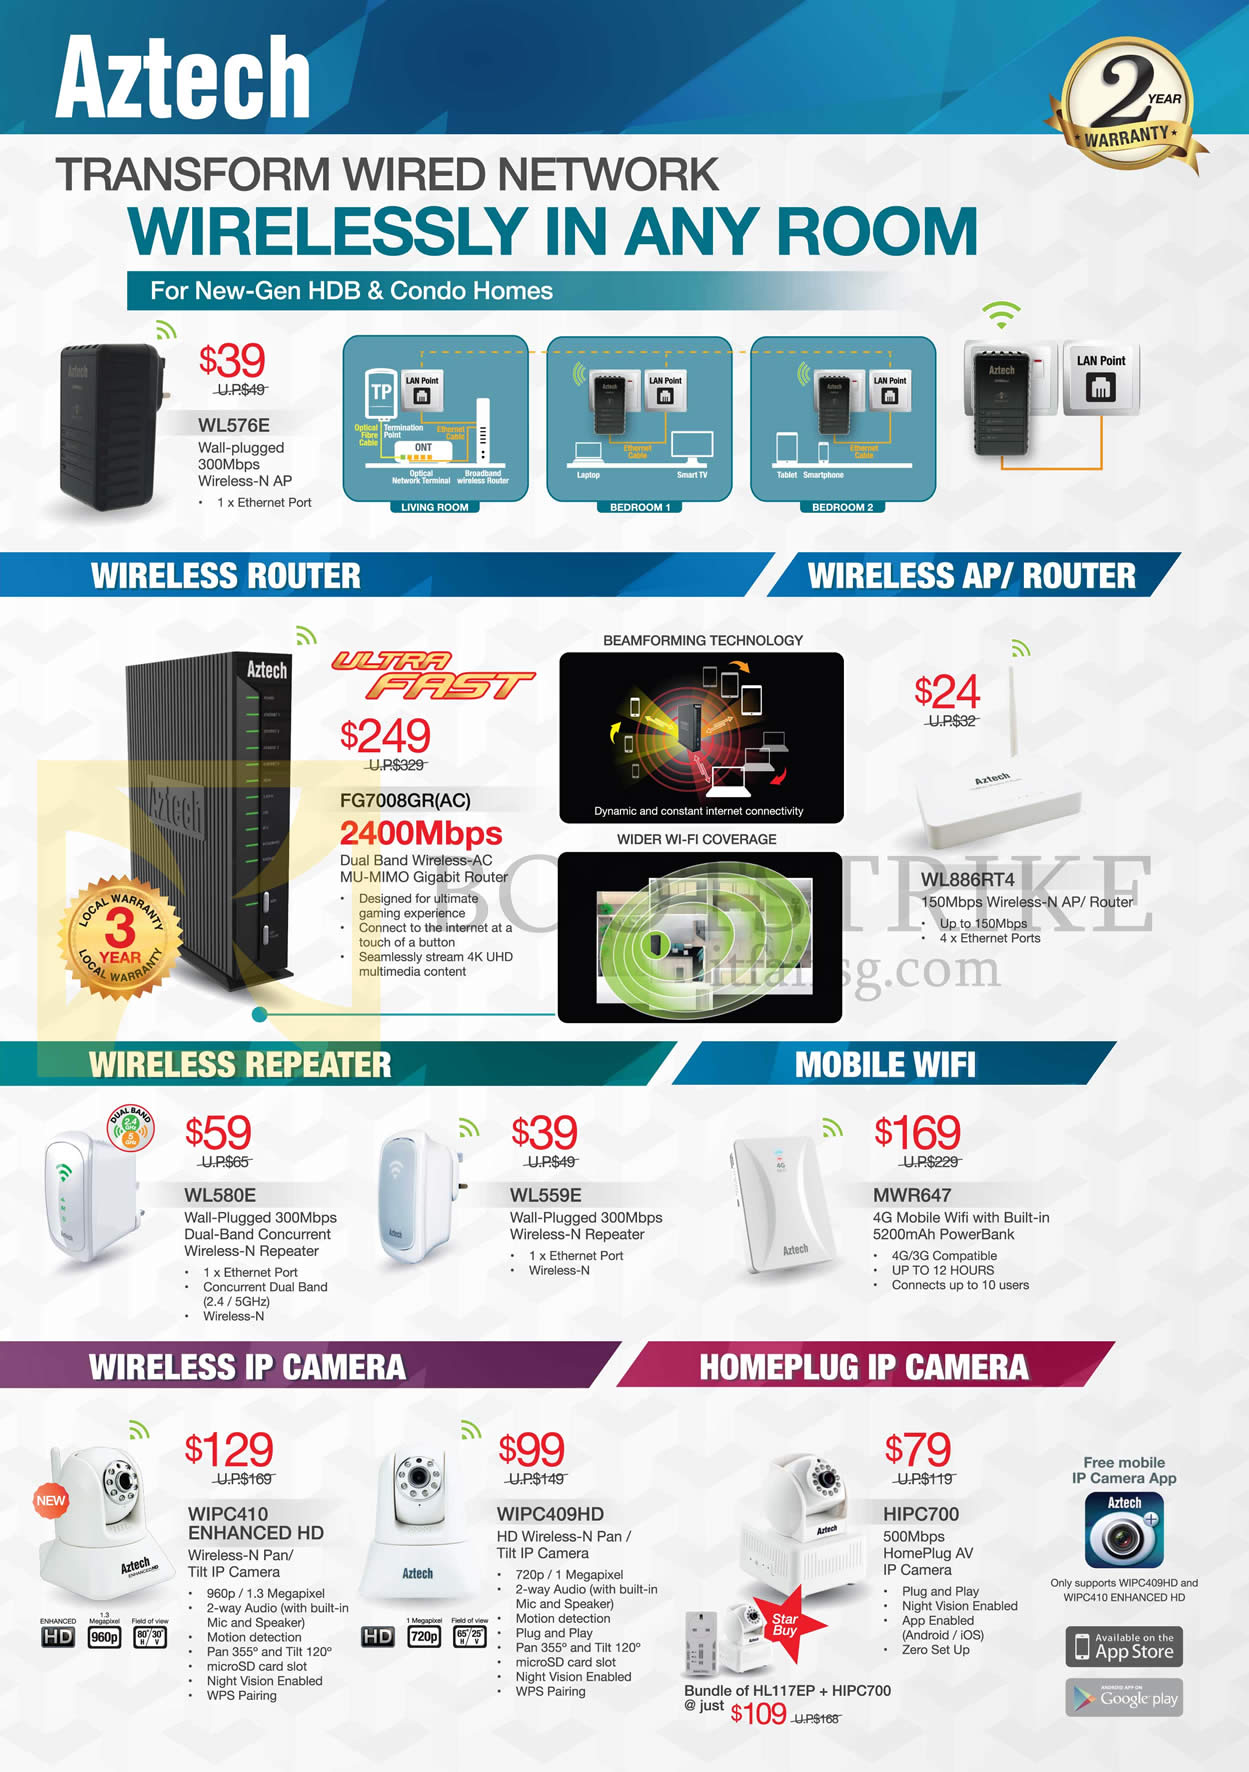 PC SHOW 2015 price list image brochure of Aztech Networking Wireless Router, AP Router, Repeater, IP Camera, Mobile Wifi, Homeplug IP Camera